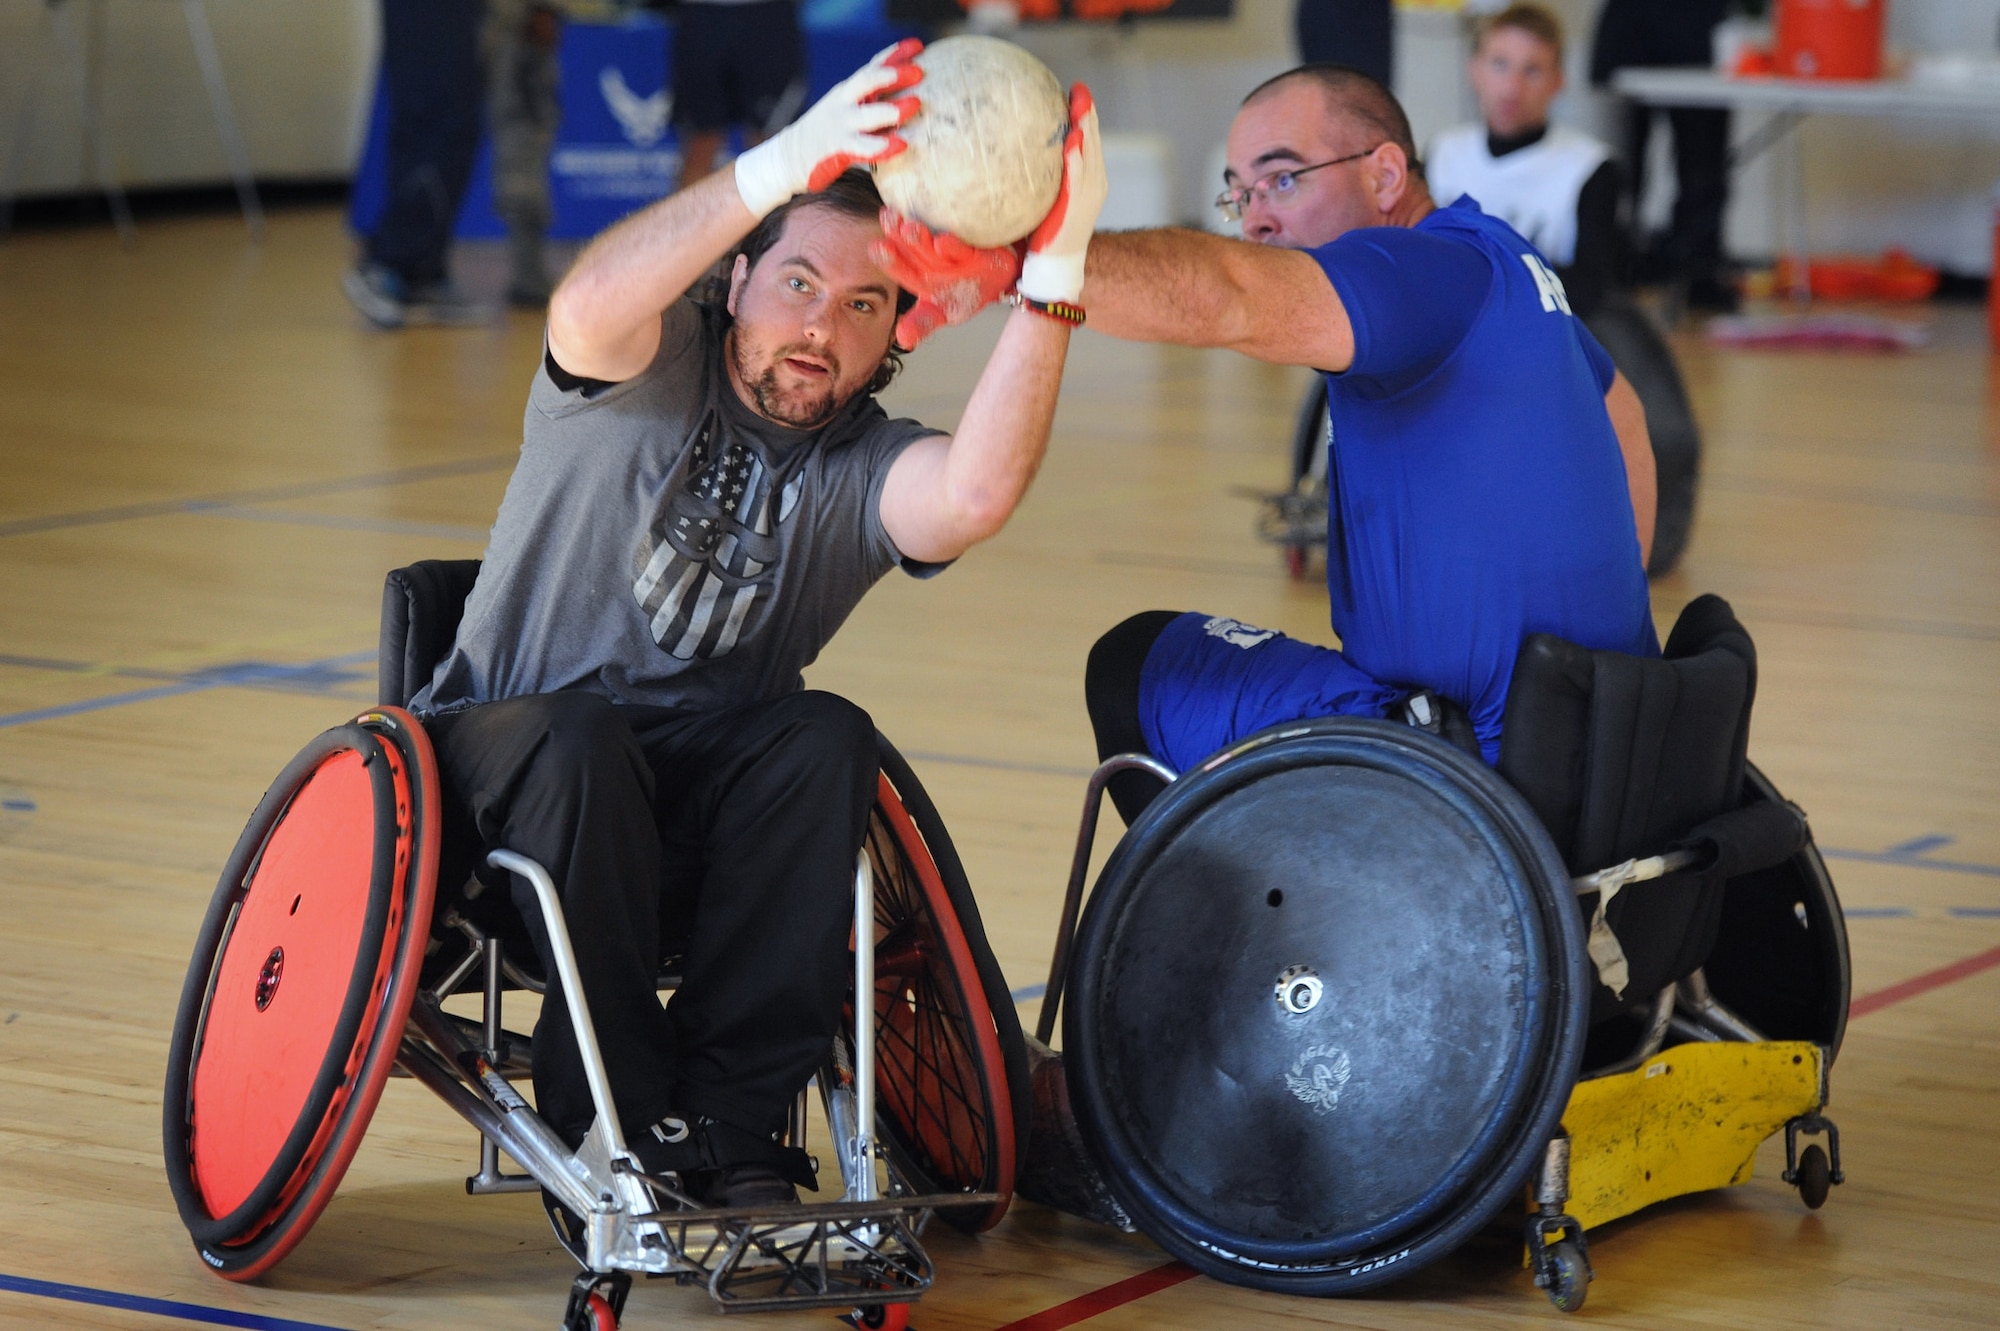 A player representing U.S. Special Operations Command hustles for possession against an Air Force player during tournament play Nov. 16, 2015, at Joint Base Andrews, Md. Wounded warriors from all branches of the armed forces participated in the Warrior CARE Month’s Joint Services Wheelchair Rugby Exhibition. (Defense Department photo/Marvin Lynchard)